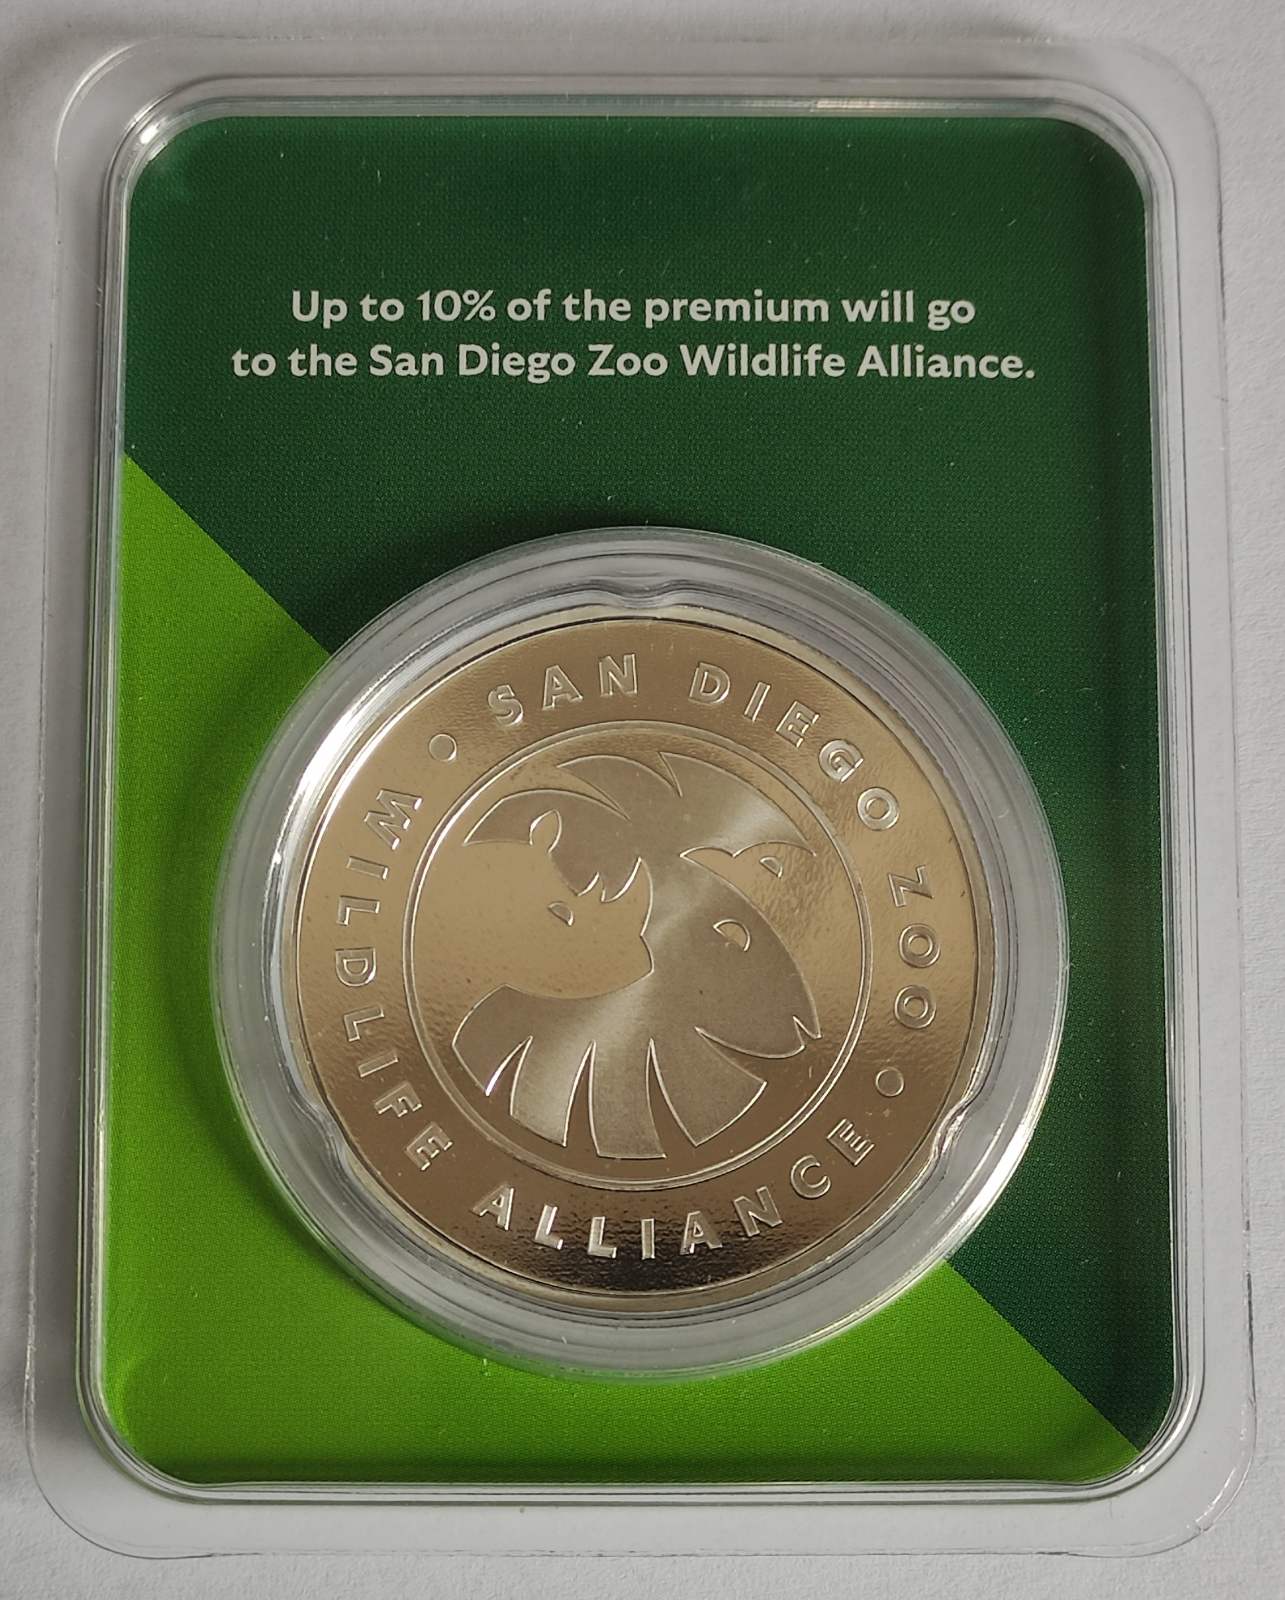 San Diego Zoo 1 oz Colorized Silver Coin in Tamper-Evident Packaging